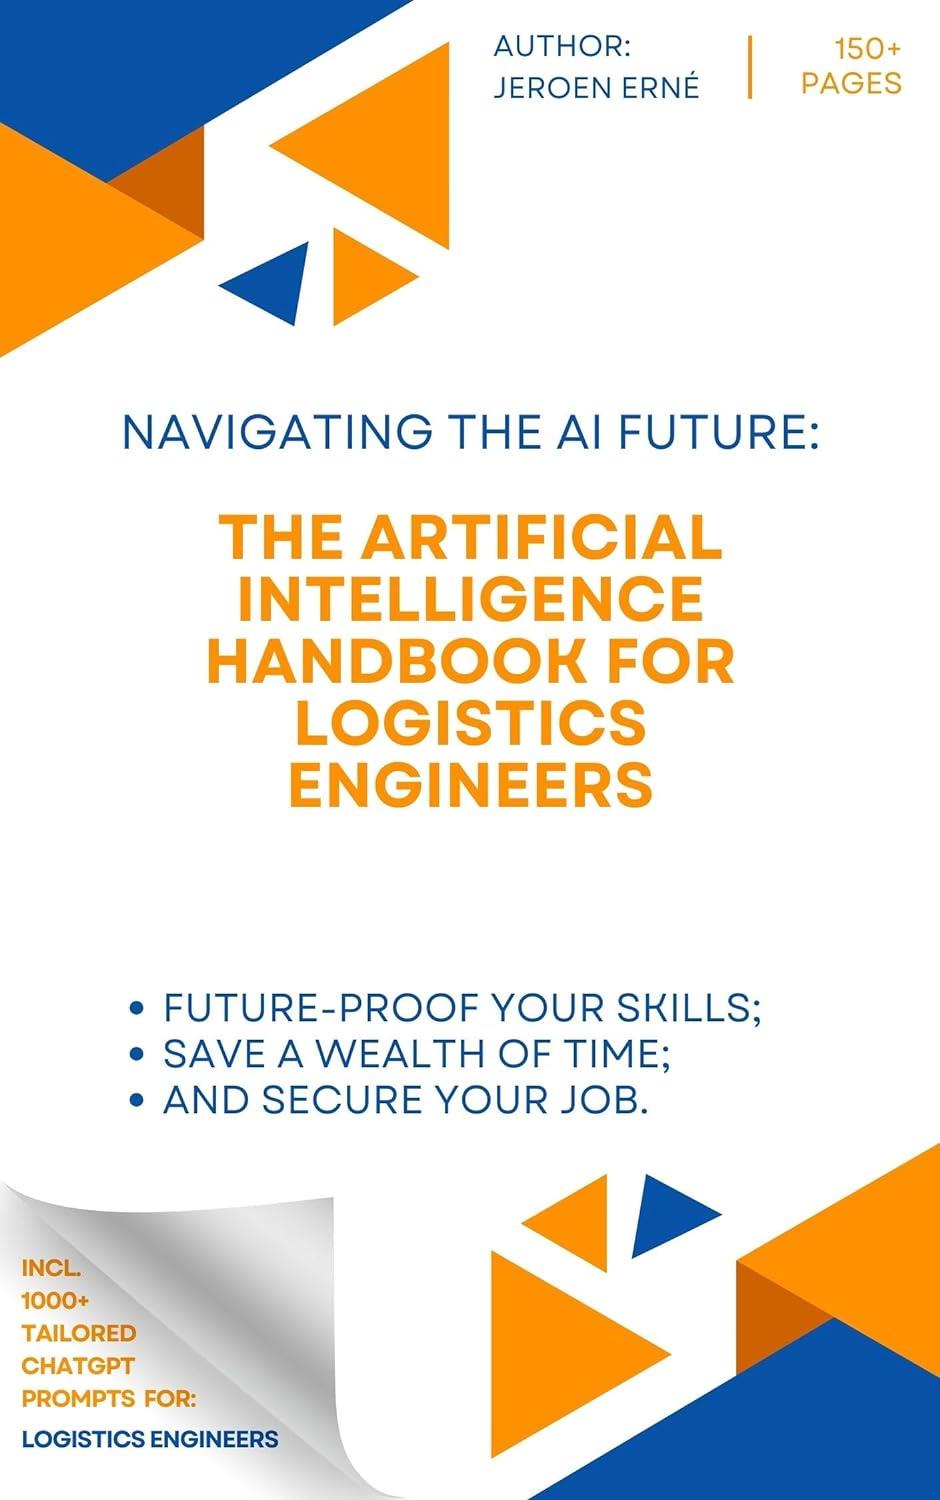 The Artificial Intelligence Handbook for Logistics Engineers